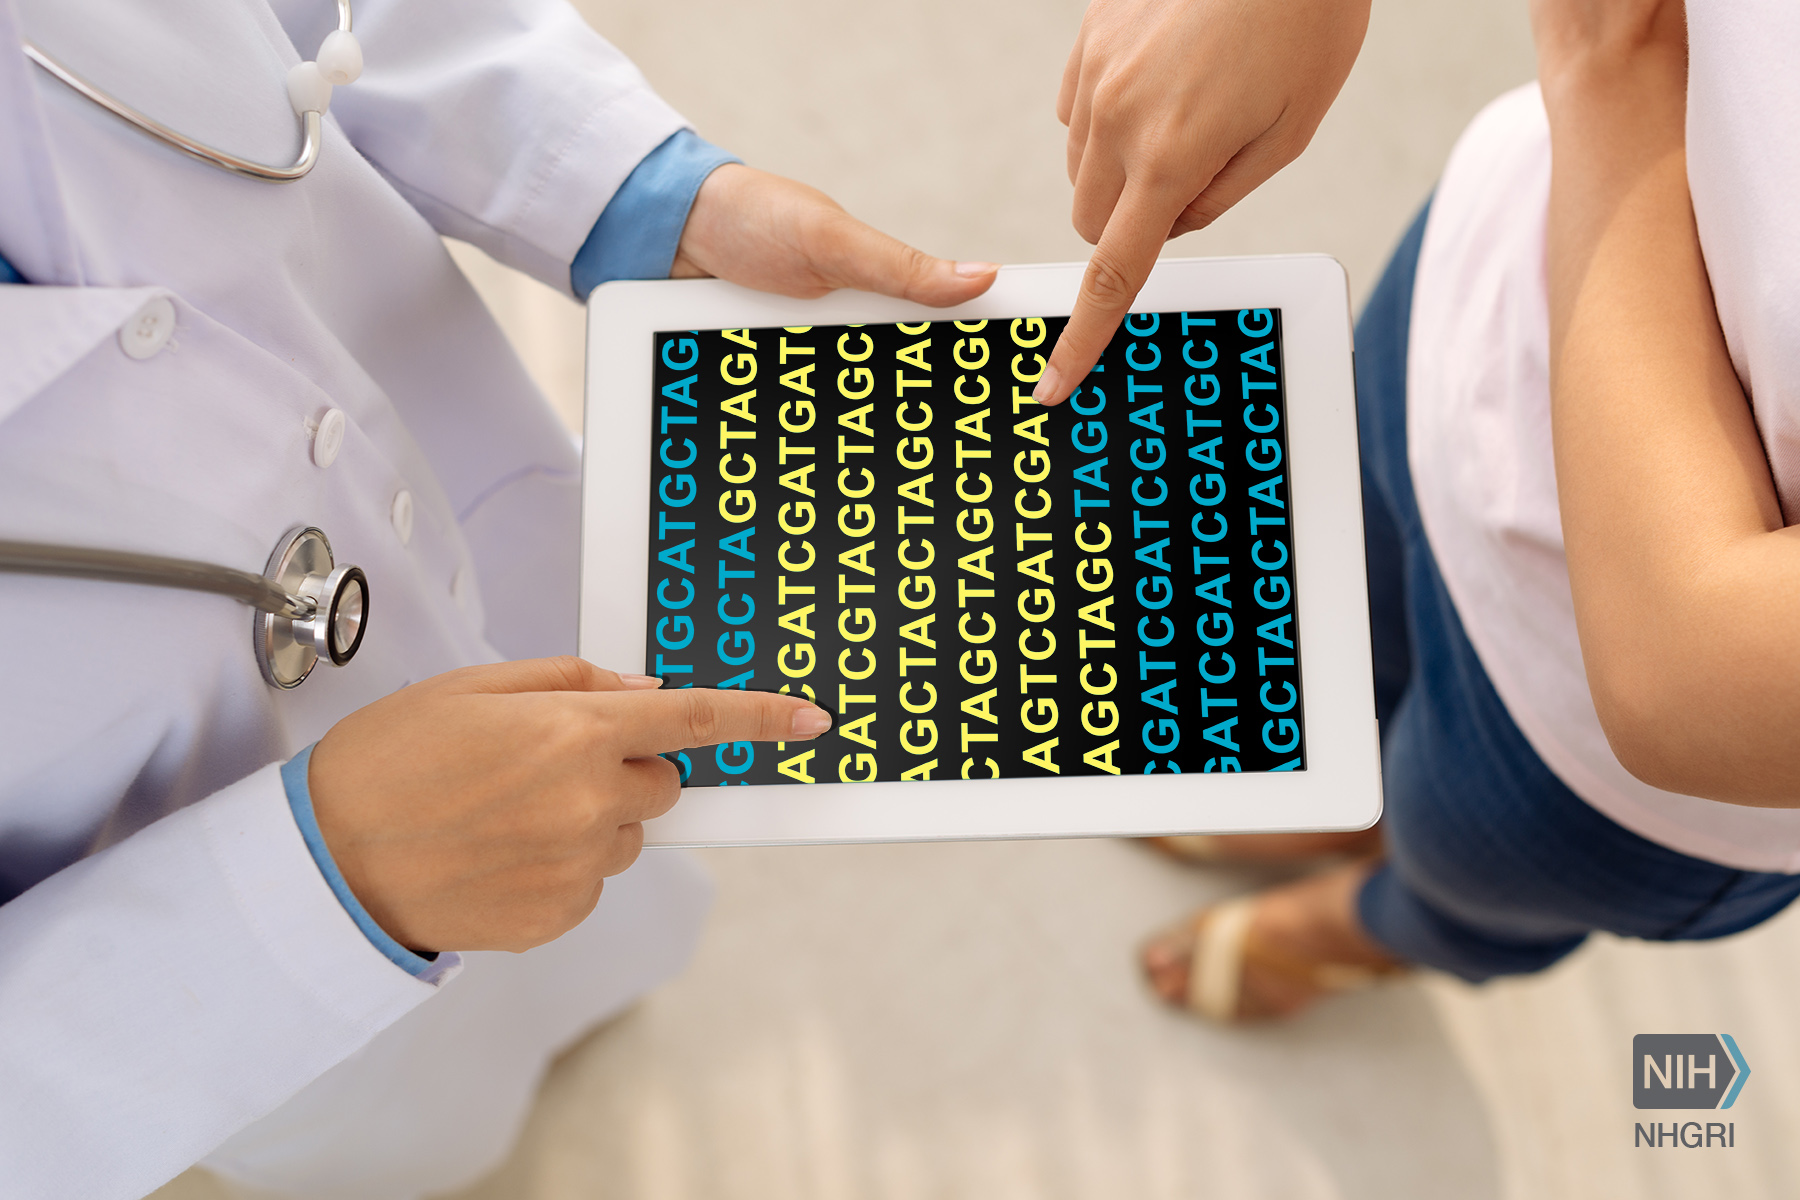 Bird's eye view of a doctor holding an iPad that contains a DNA sequence. Another person stands pointing specifically to the sequence.